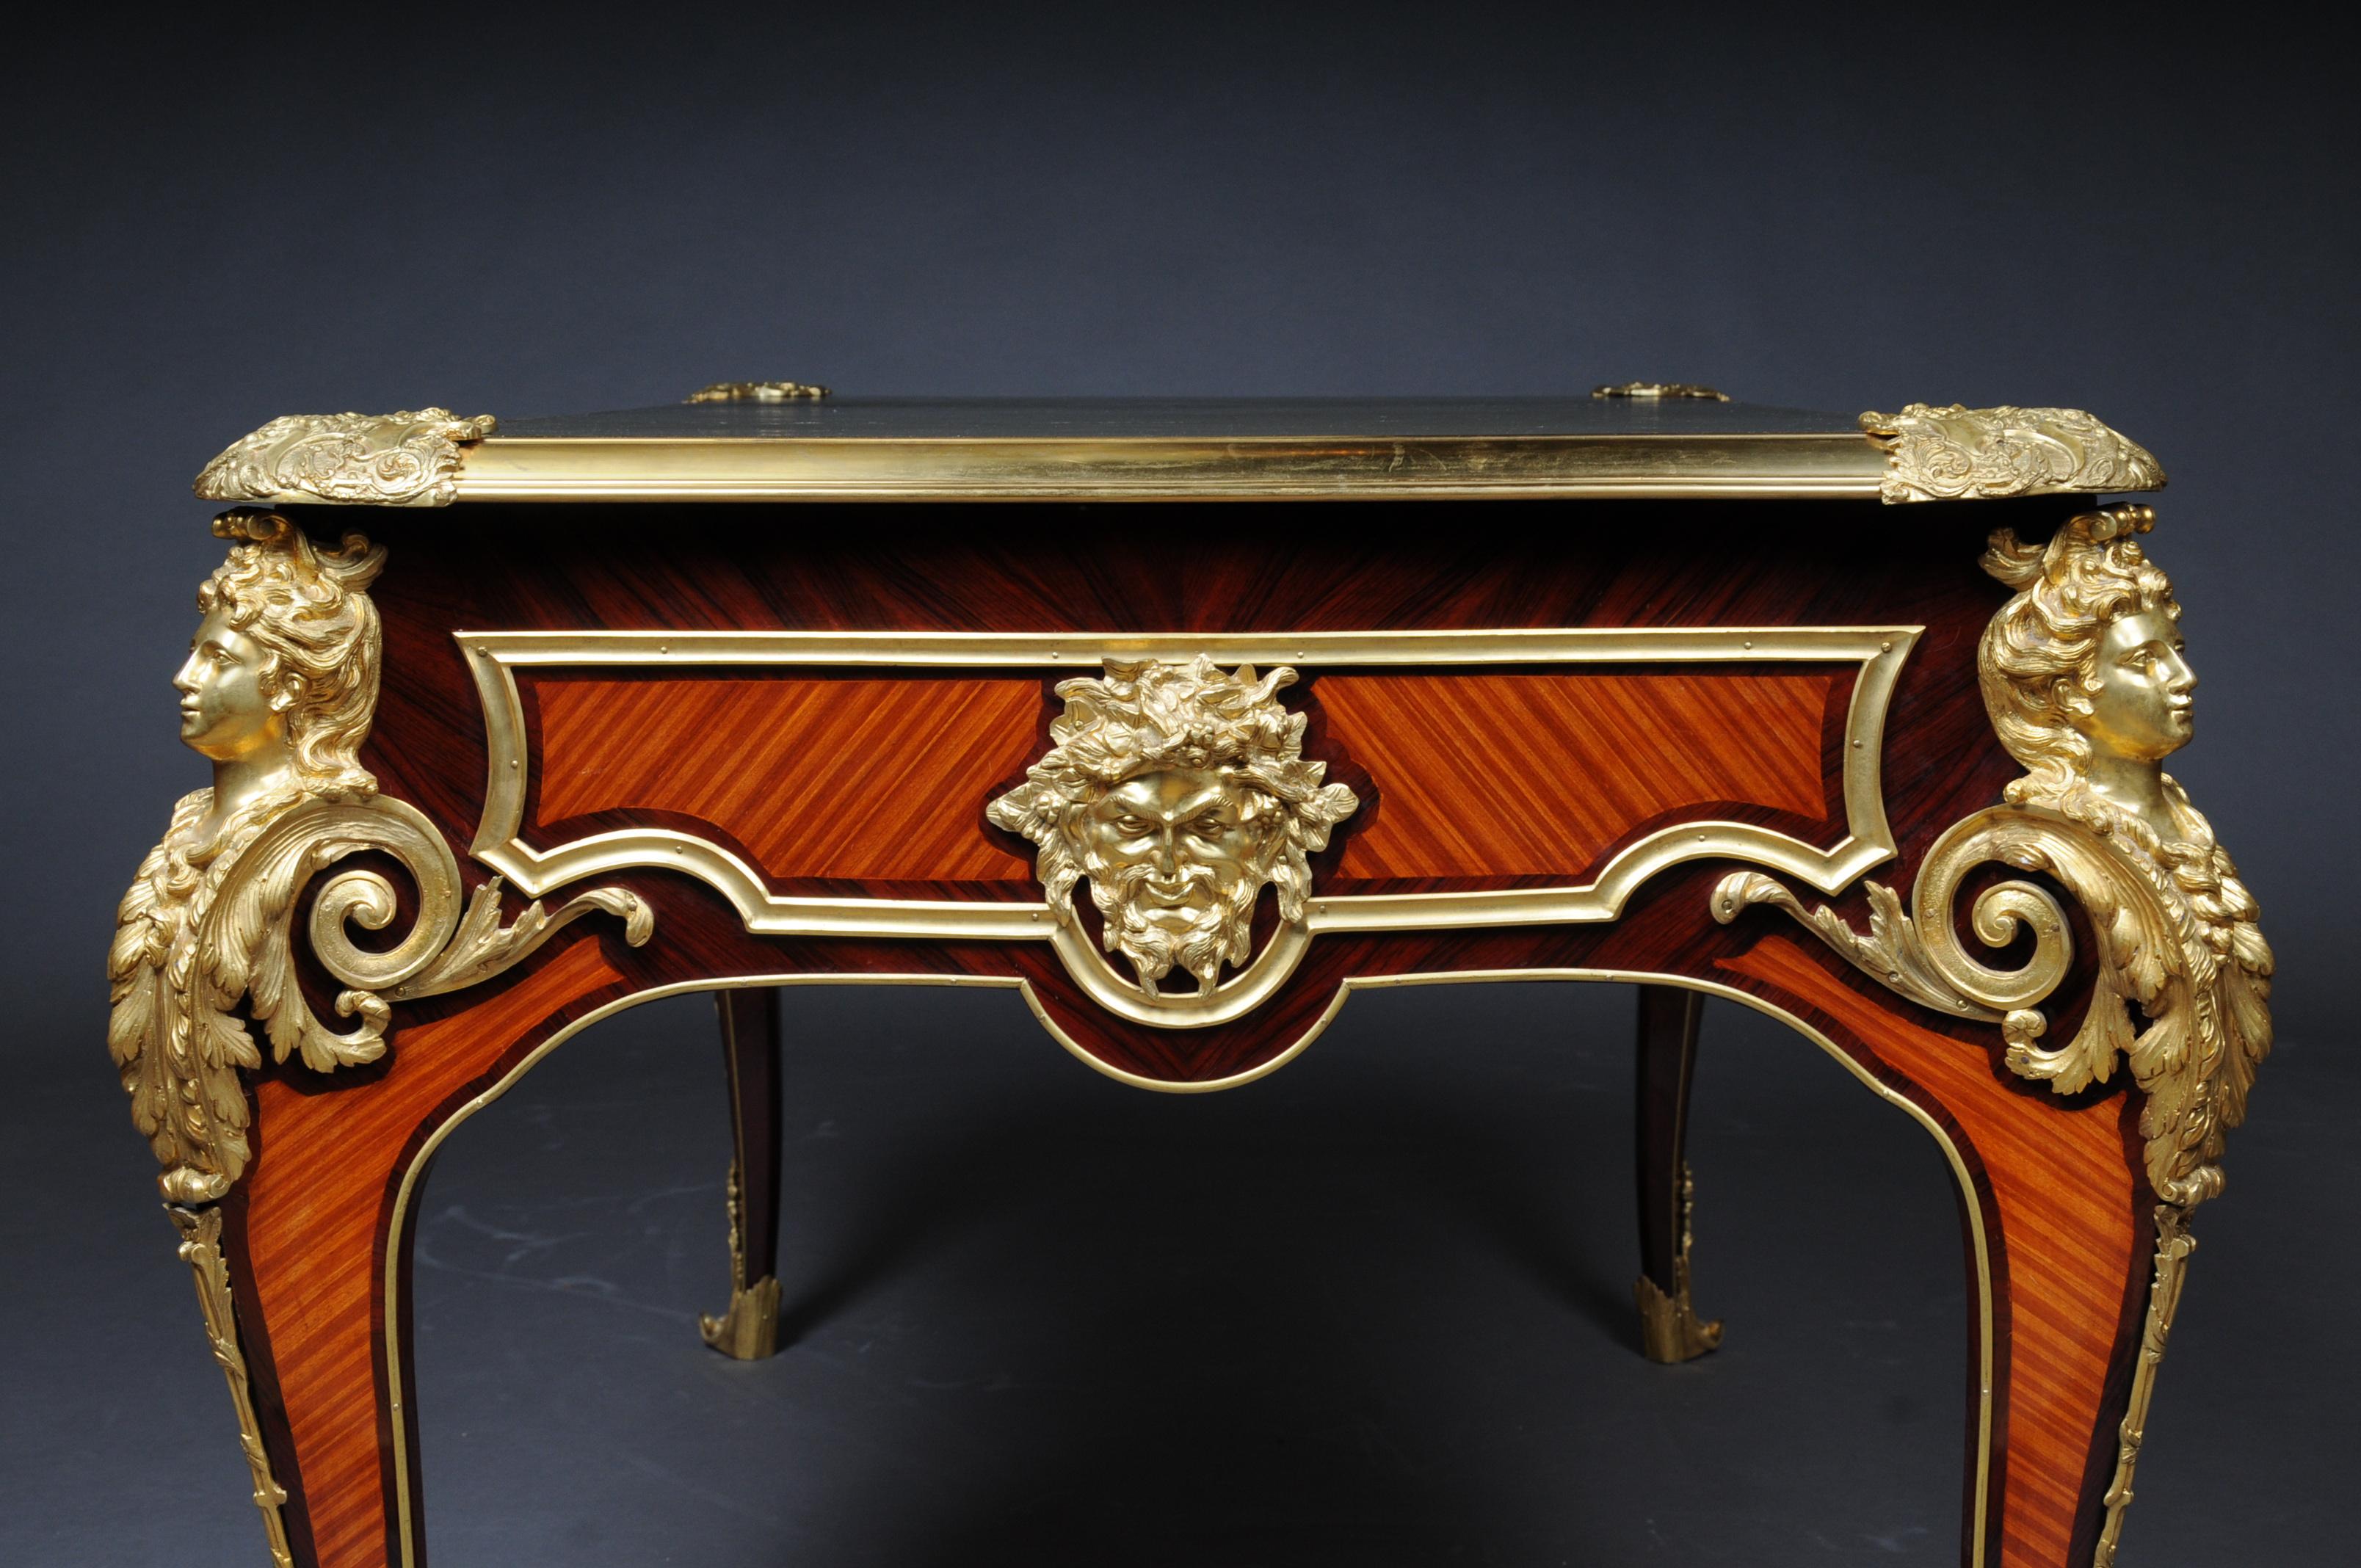 20th Century Imperial French Bureau Plat or Desk by Charles Boulle For Sale 5